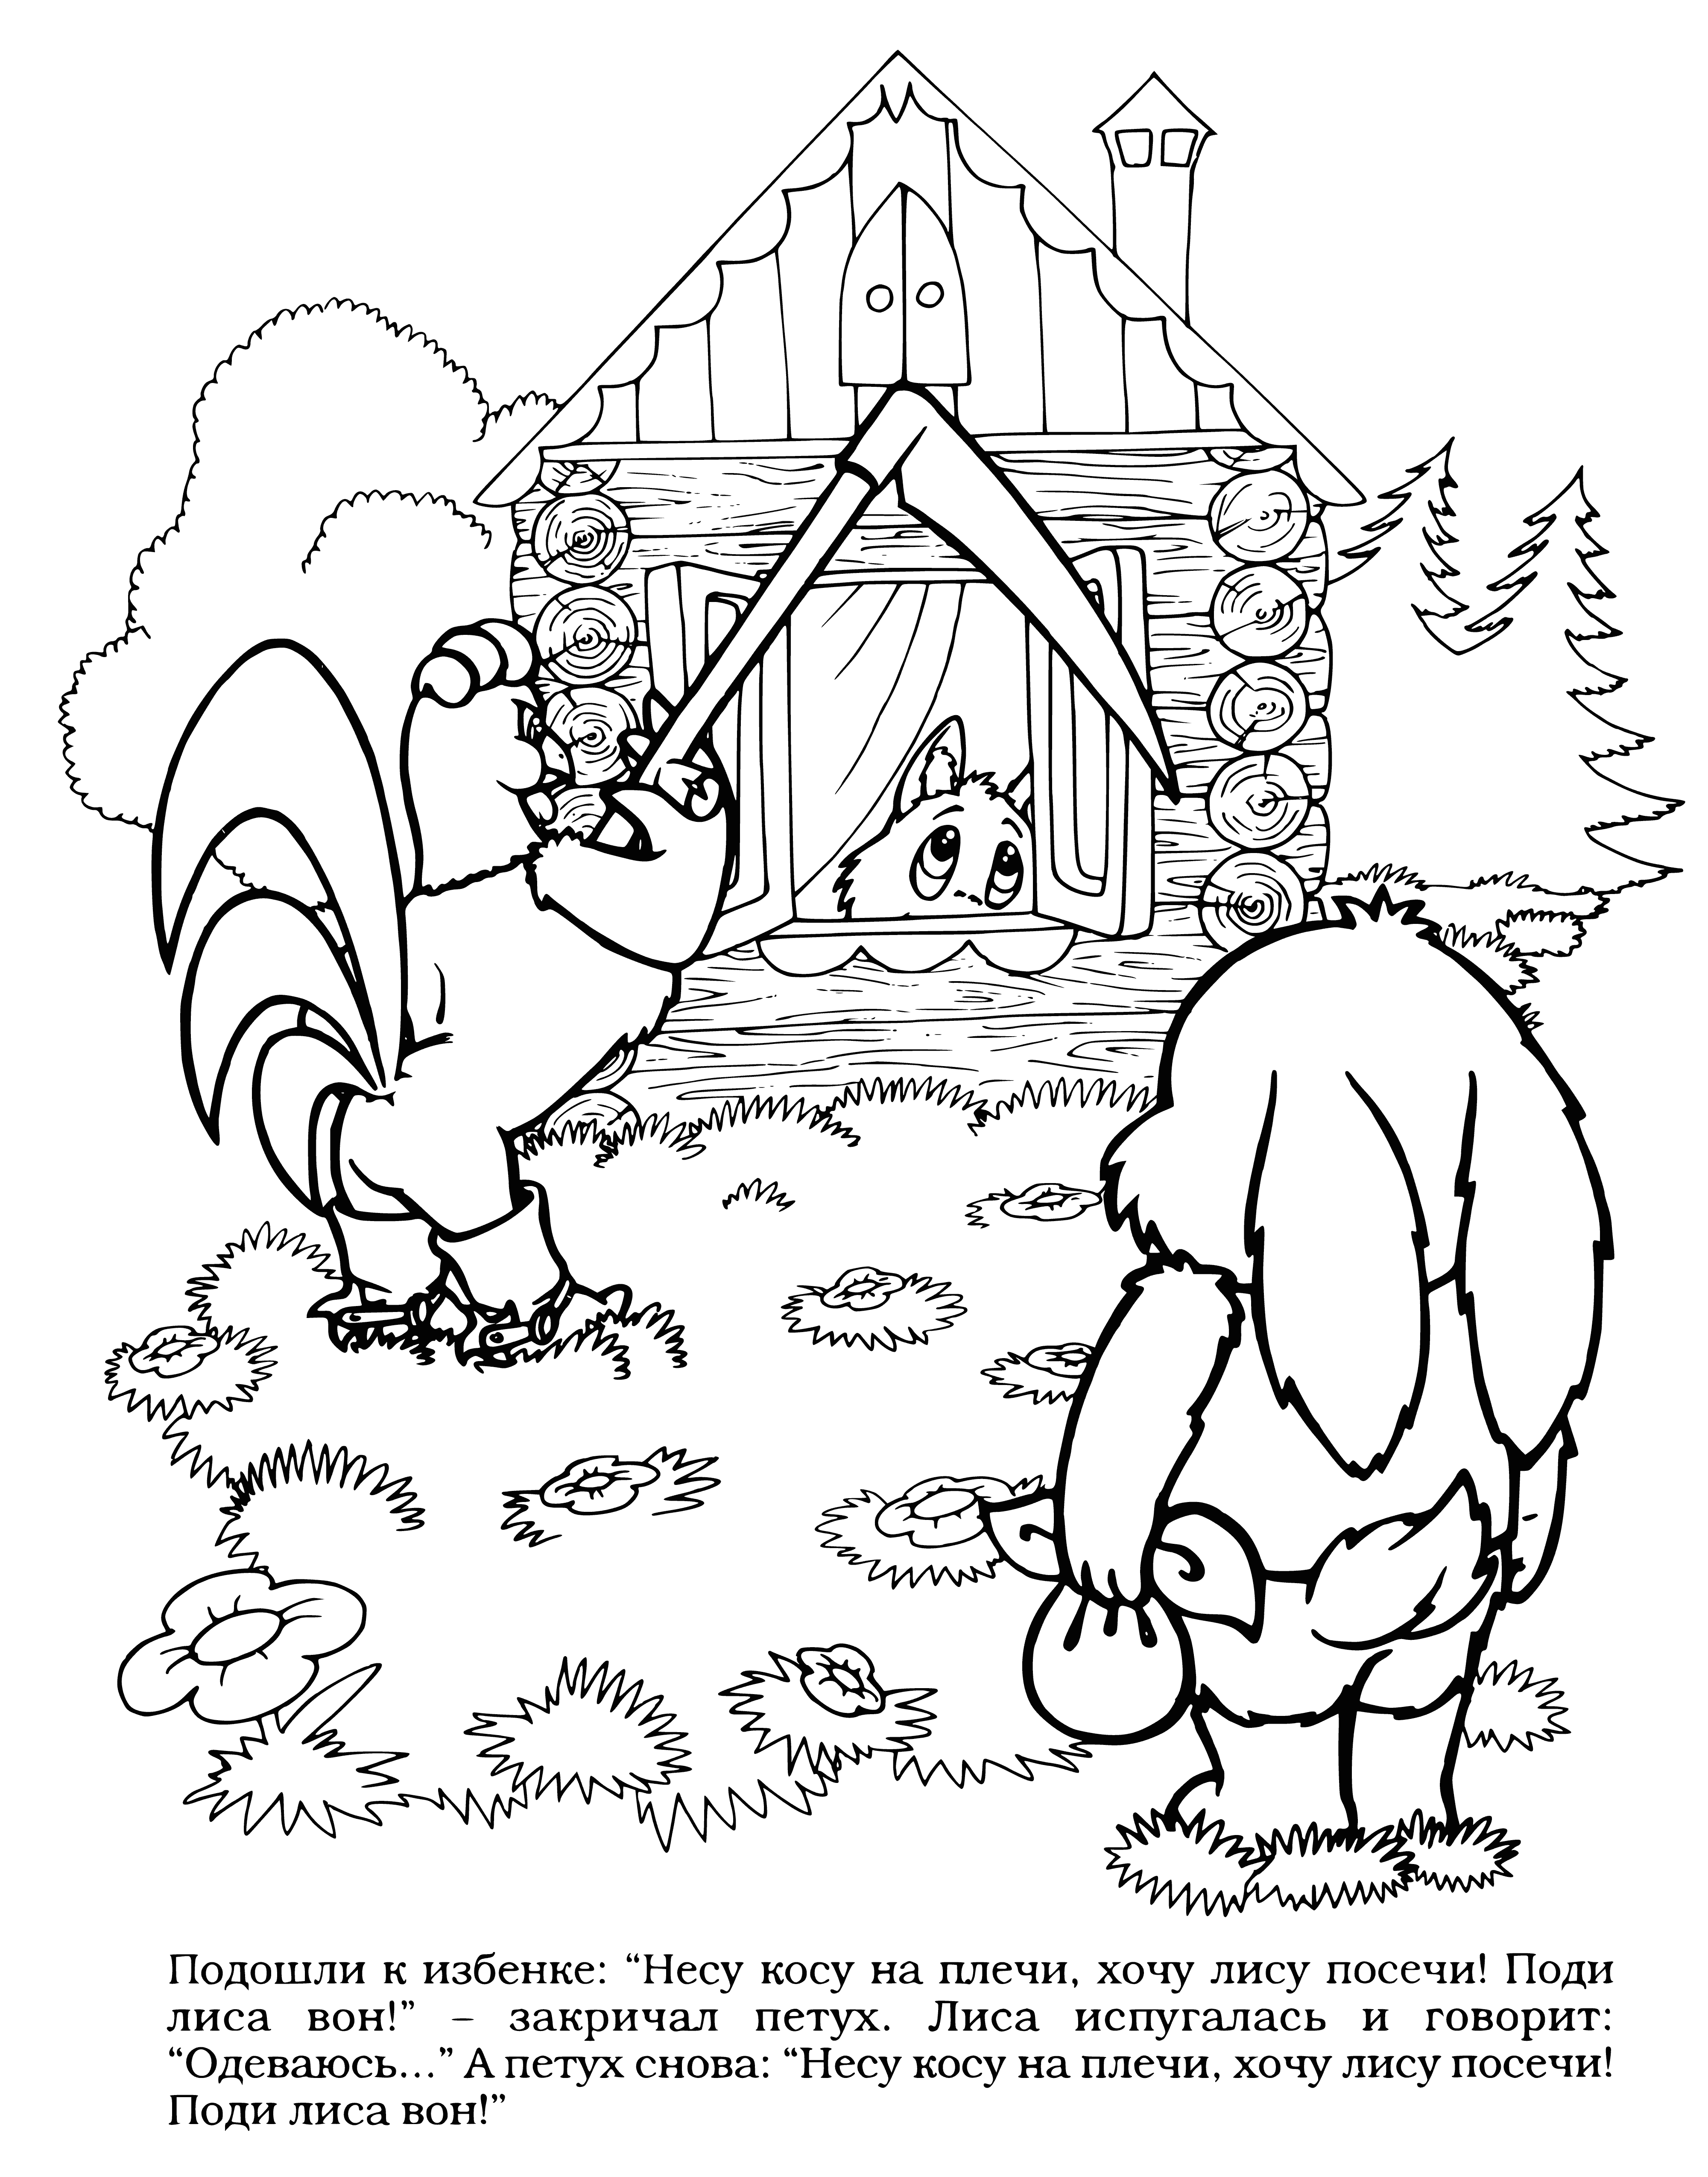 coloring page: Fox runs from cock, cock follows--fox tries to escape, cock keeps chasing.